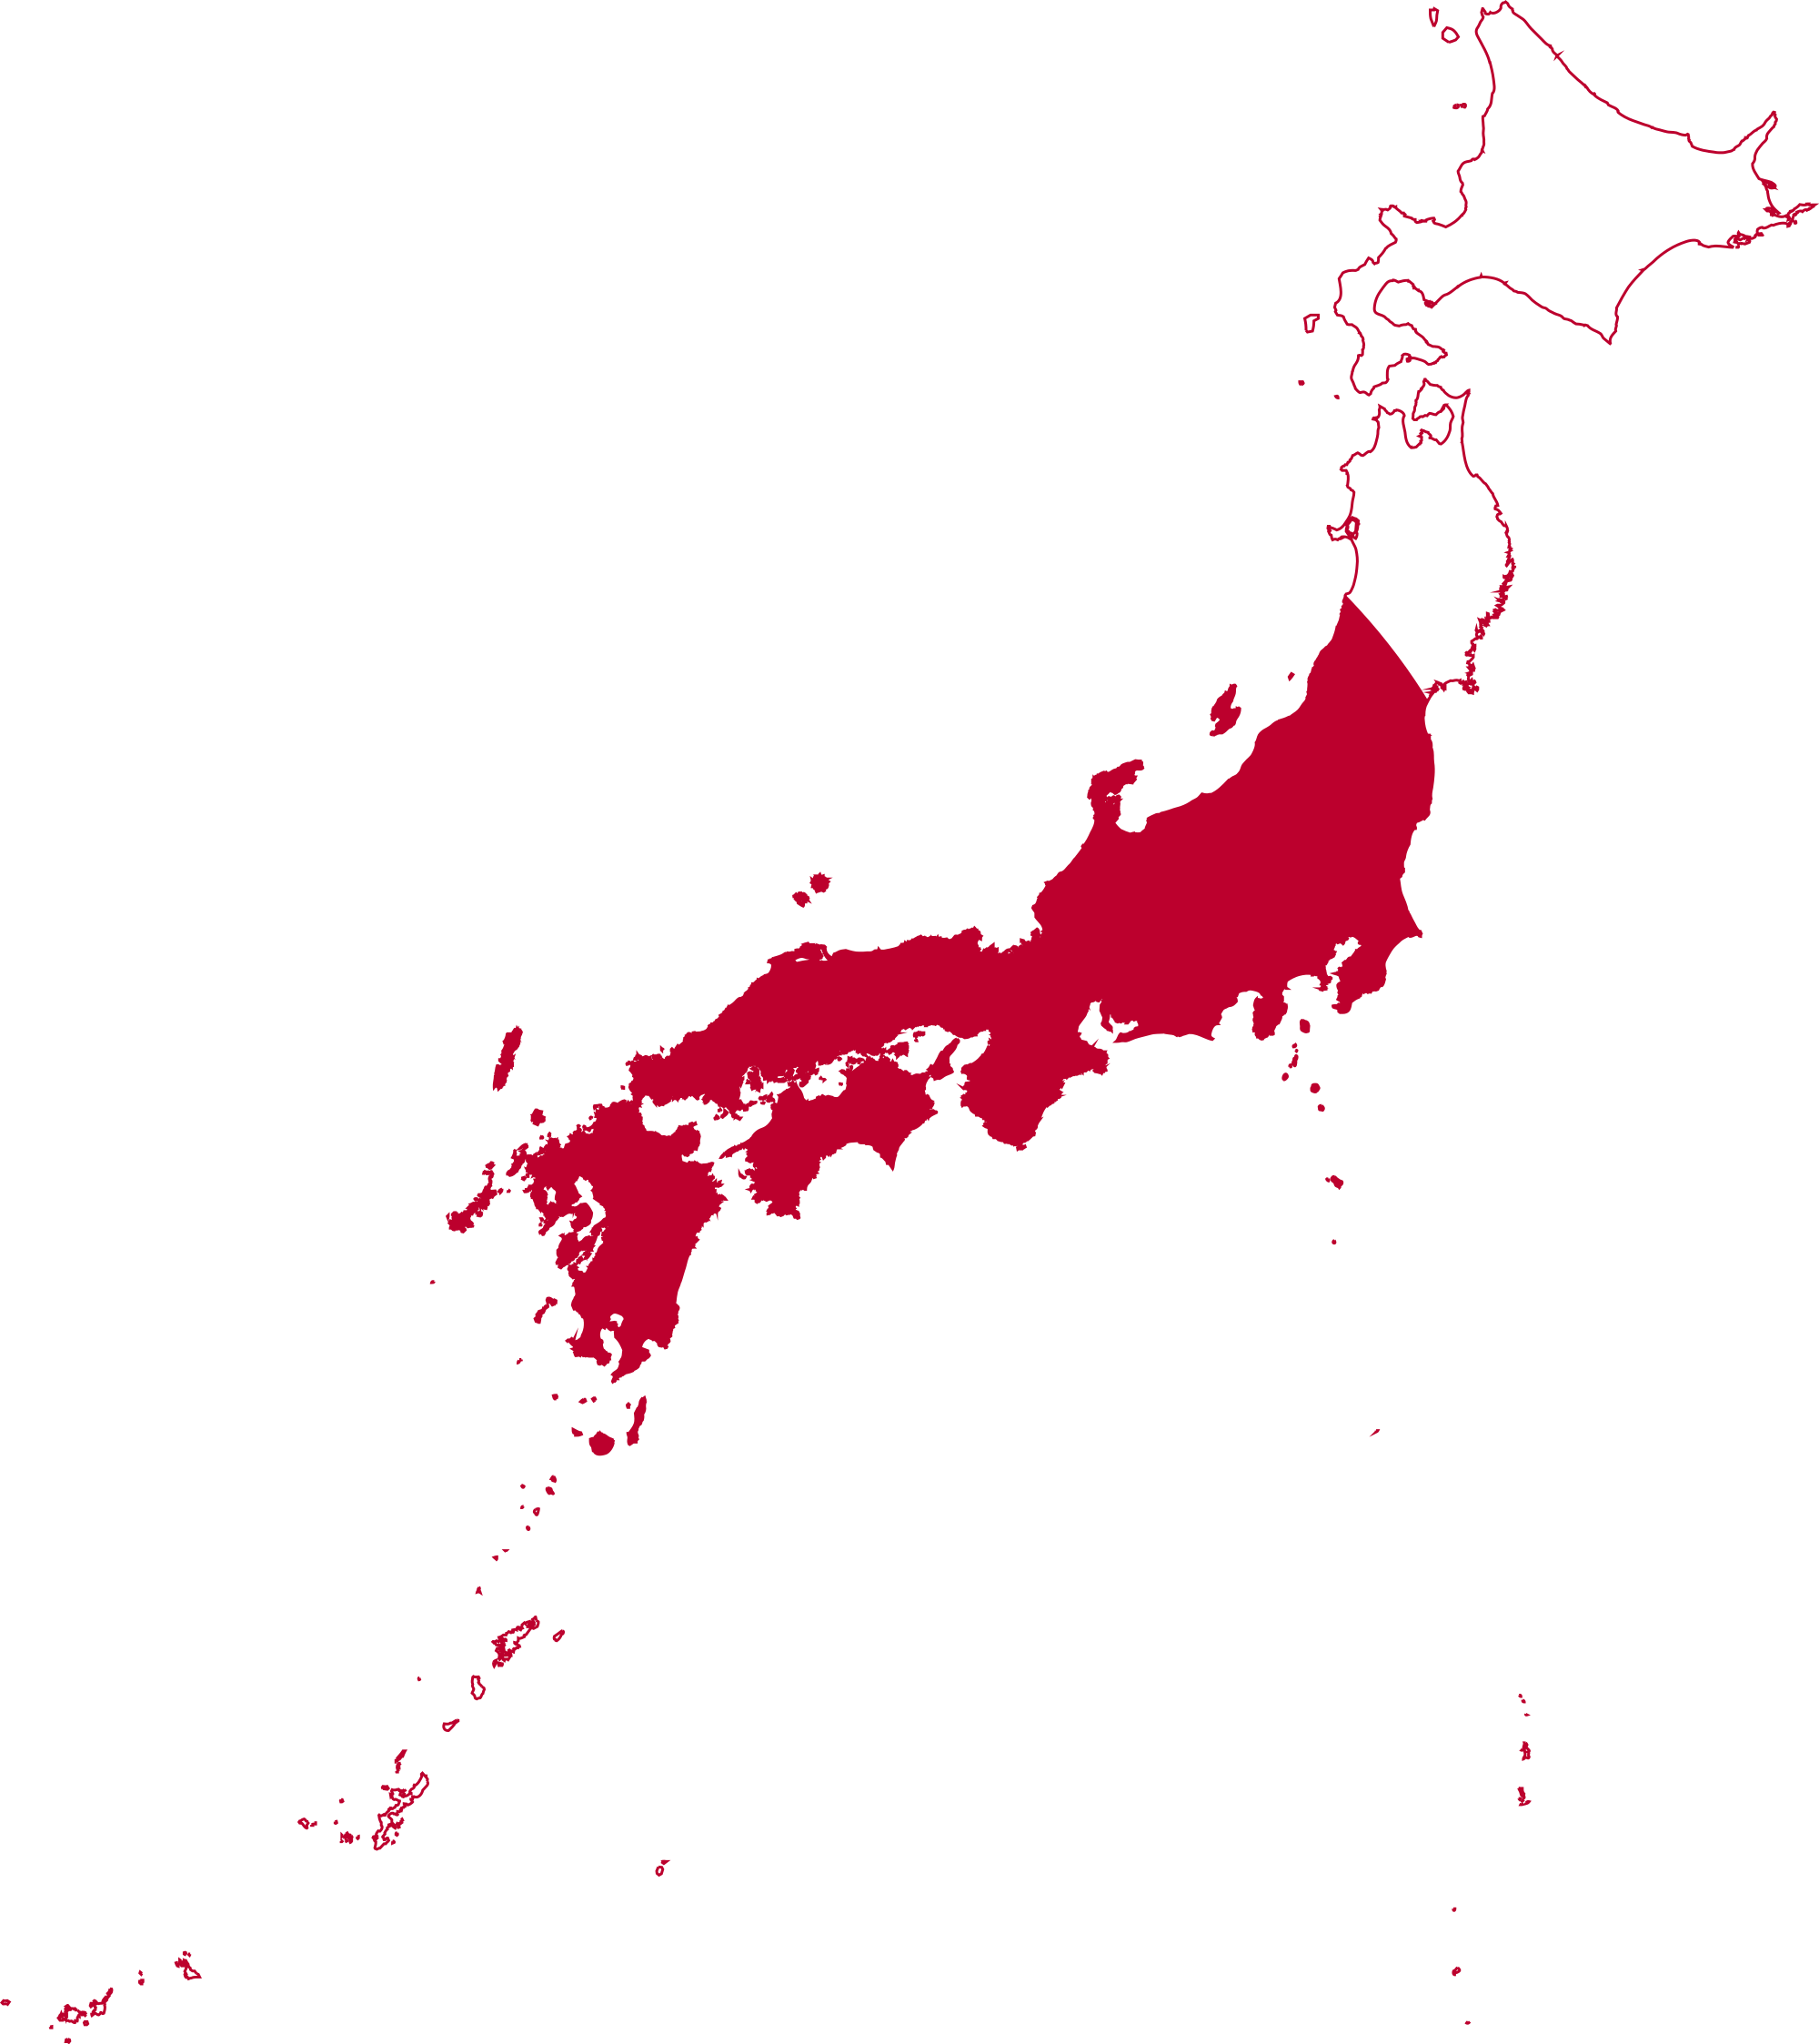 A Map Of Japan With Red And White Colors